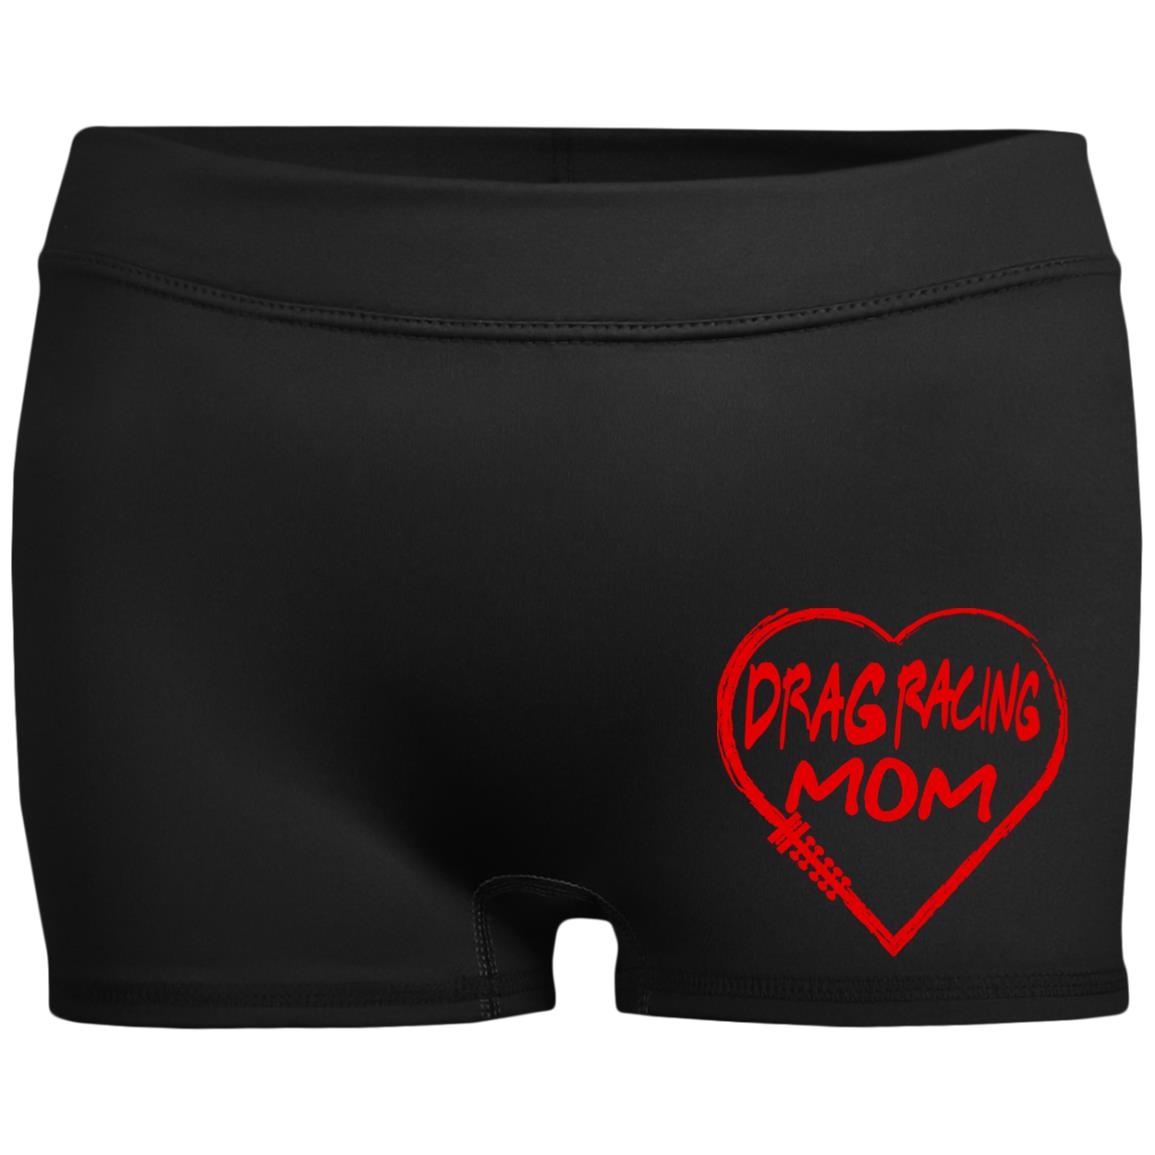 Drag Racing Mom Heart Ladies' Fitted Moisture-Wicking 2.5 inch Inseam Shorts